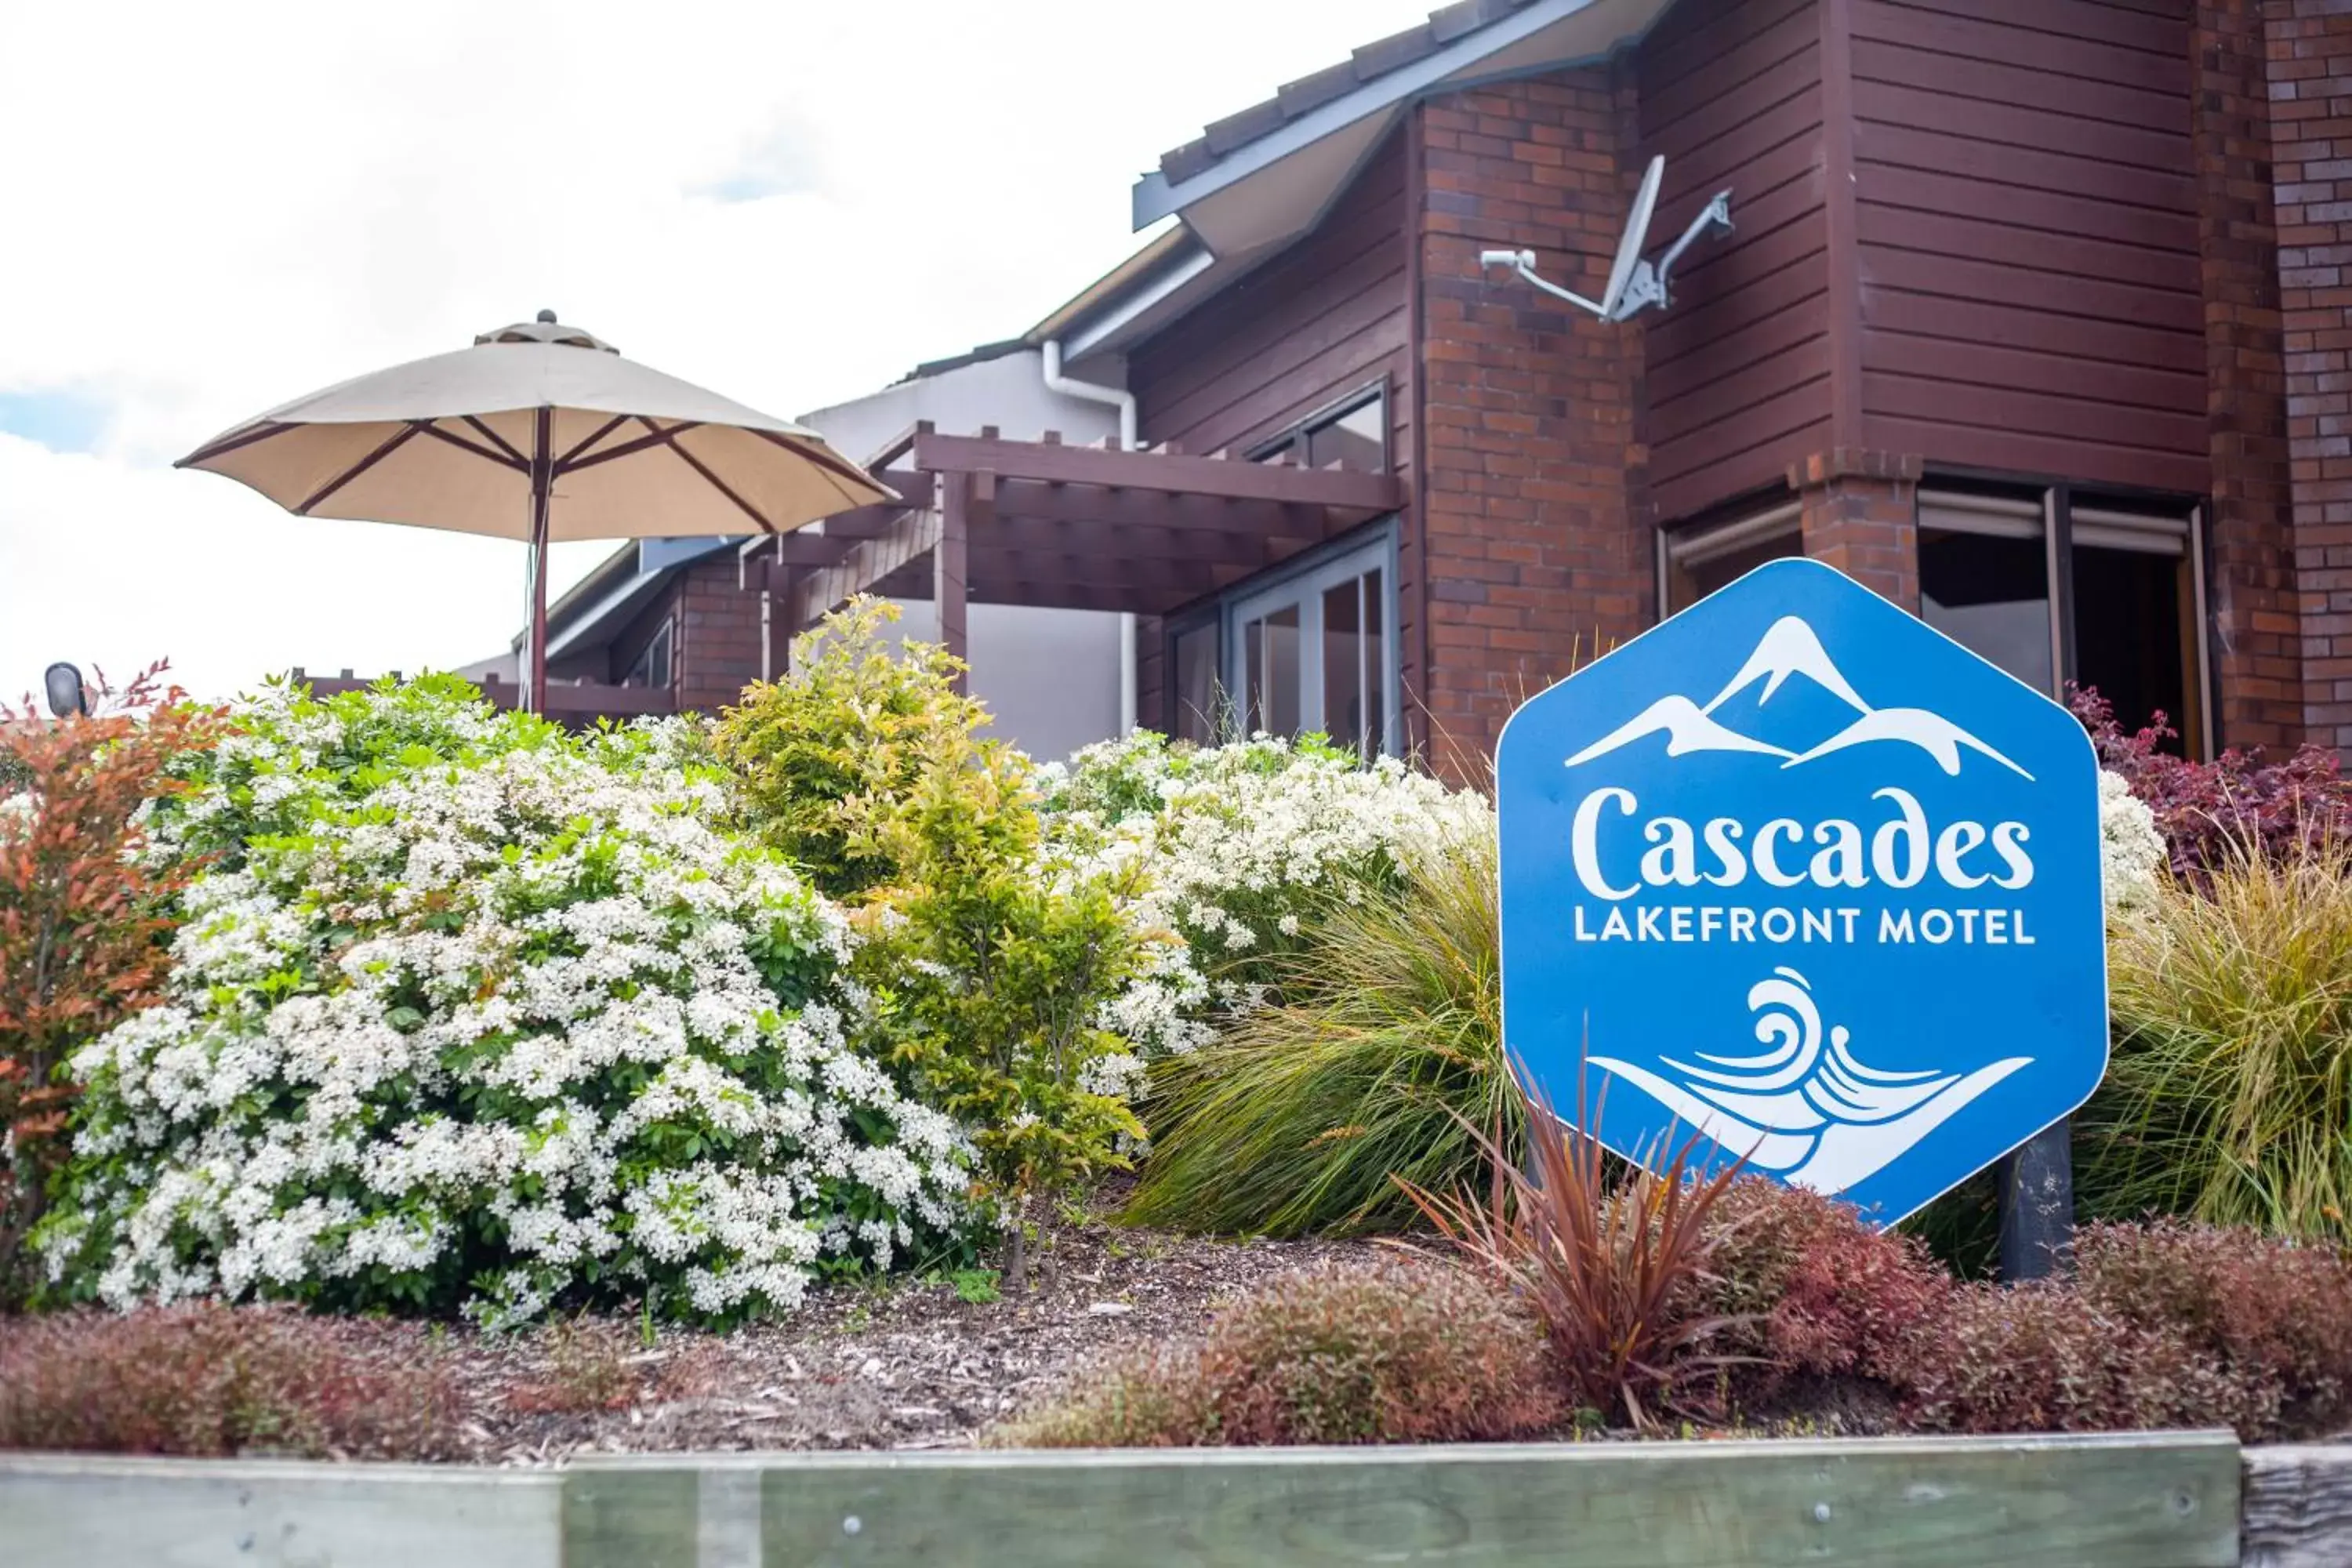 Property building in Cascades Lakefront Motel